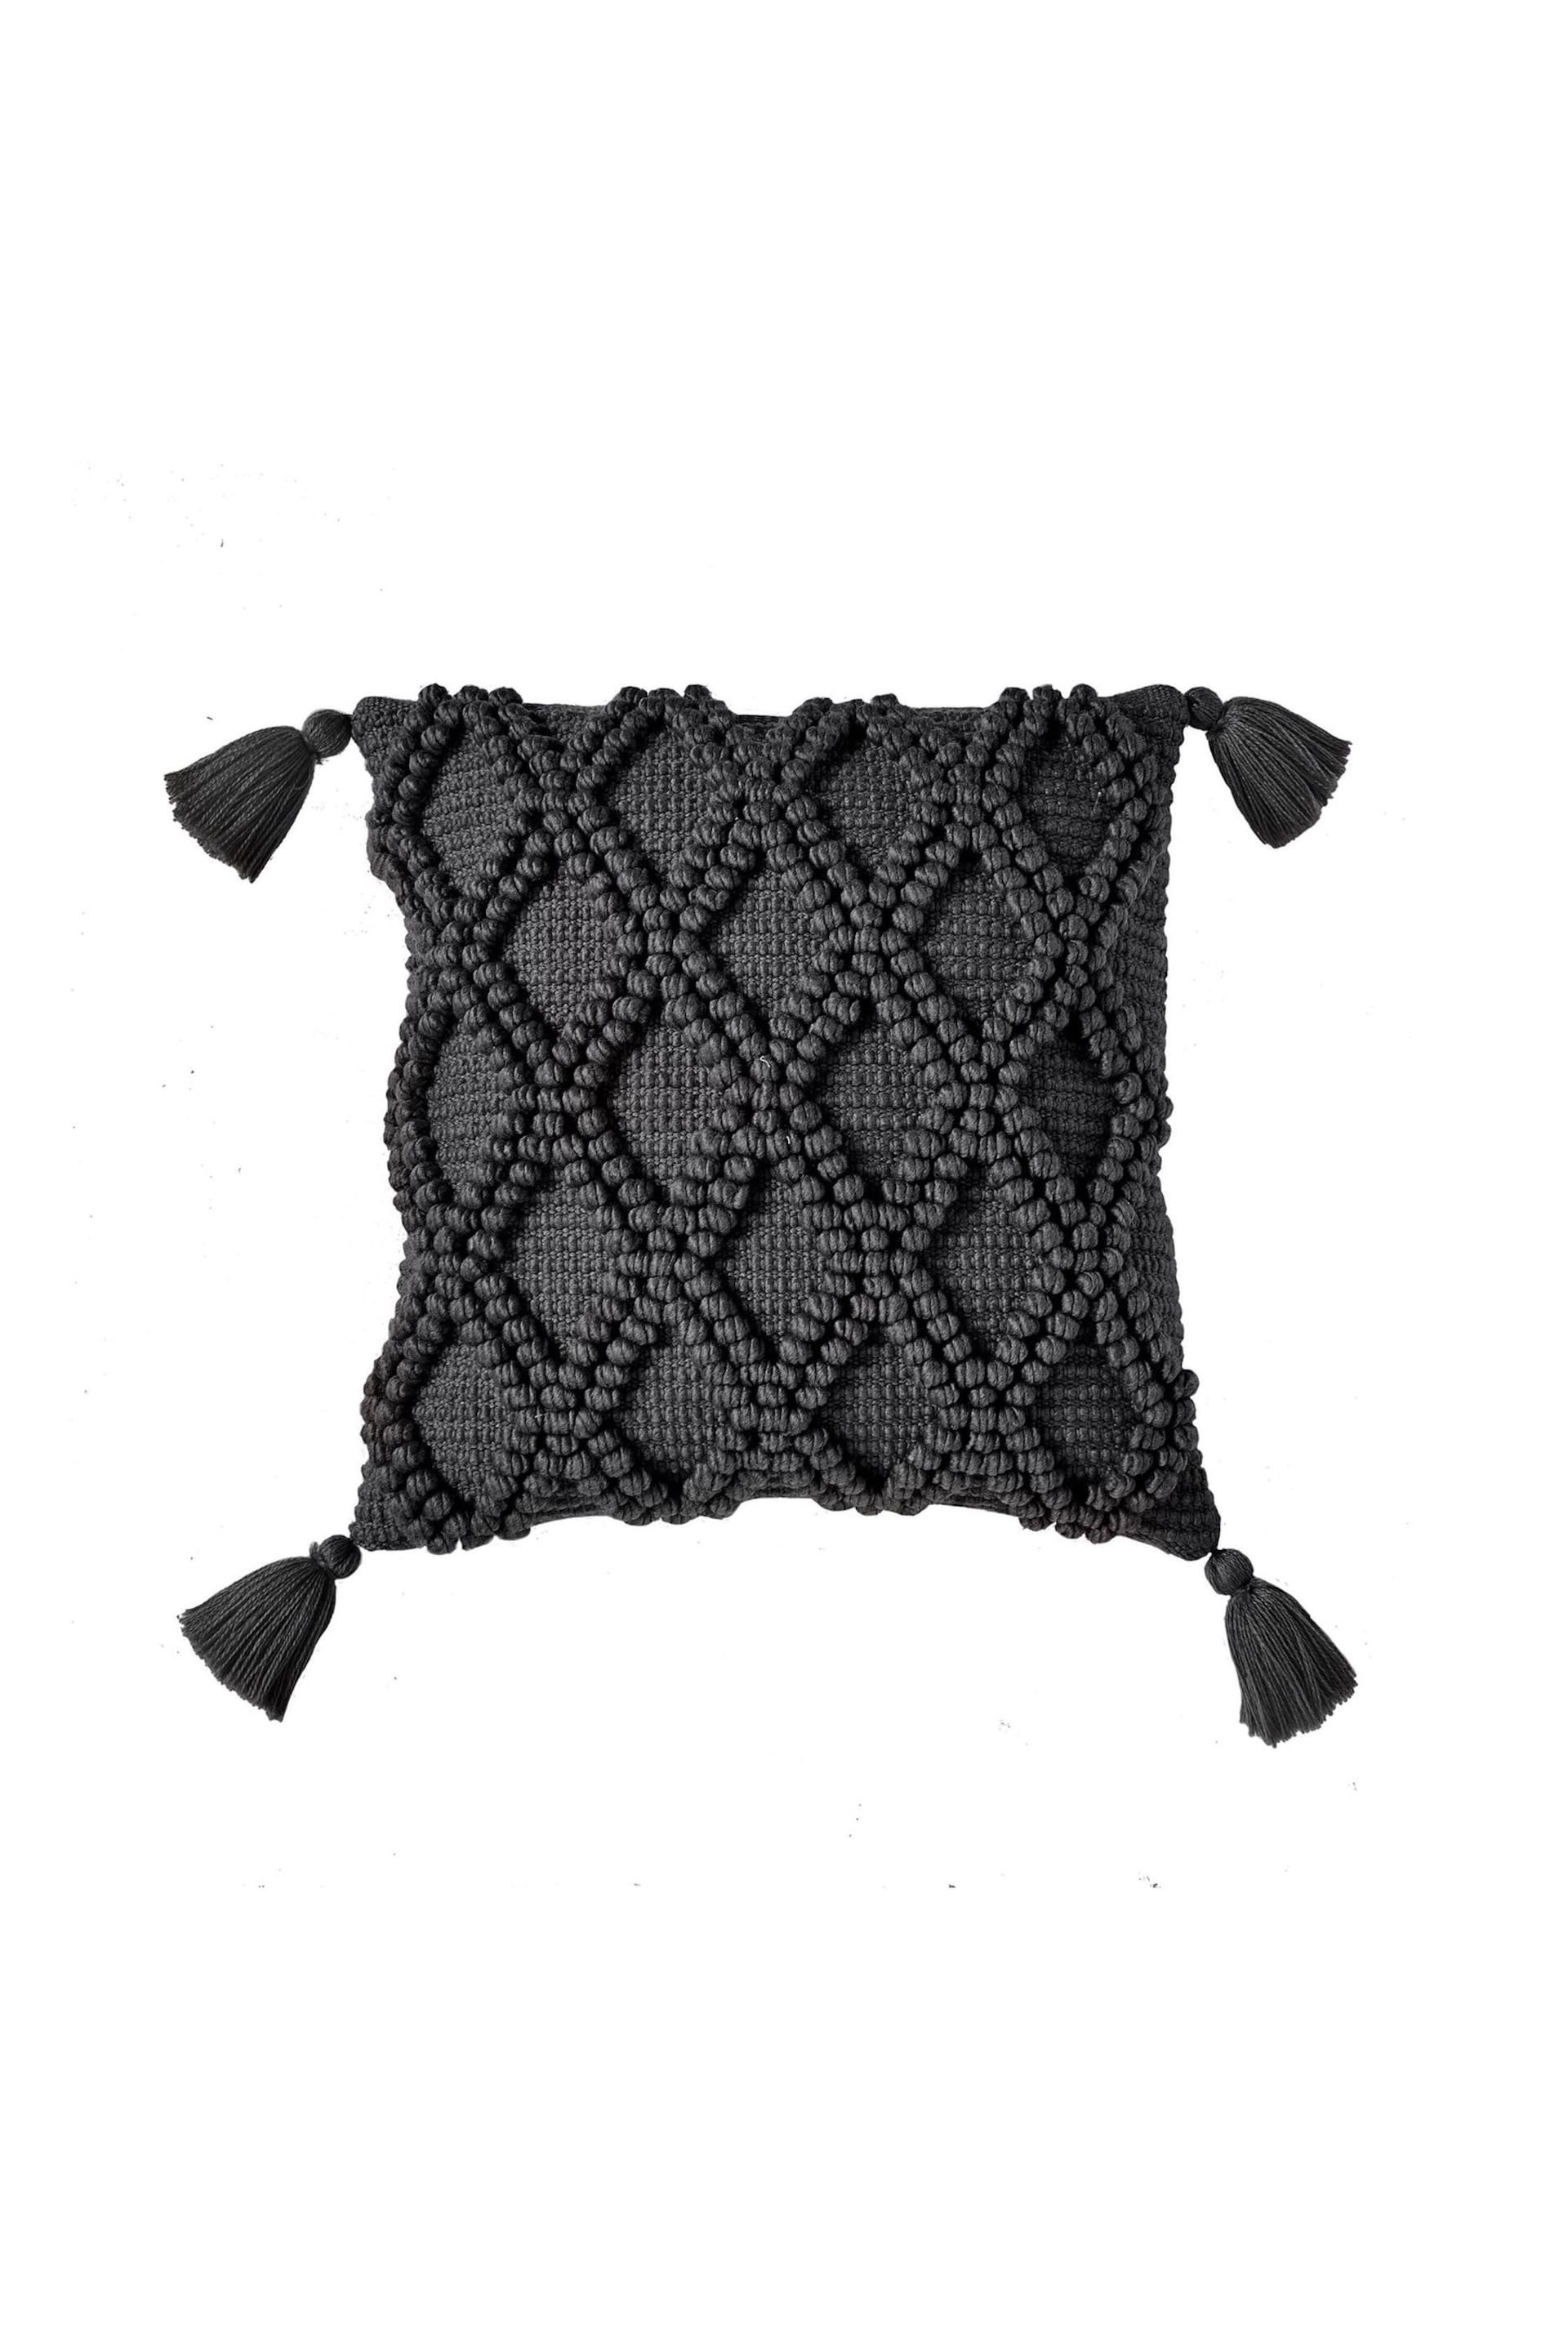 Drift Home Black Alda Outdoor Textured Filled Cushion - Image 2 of 4